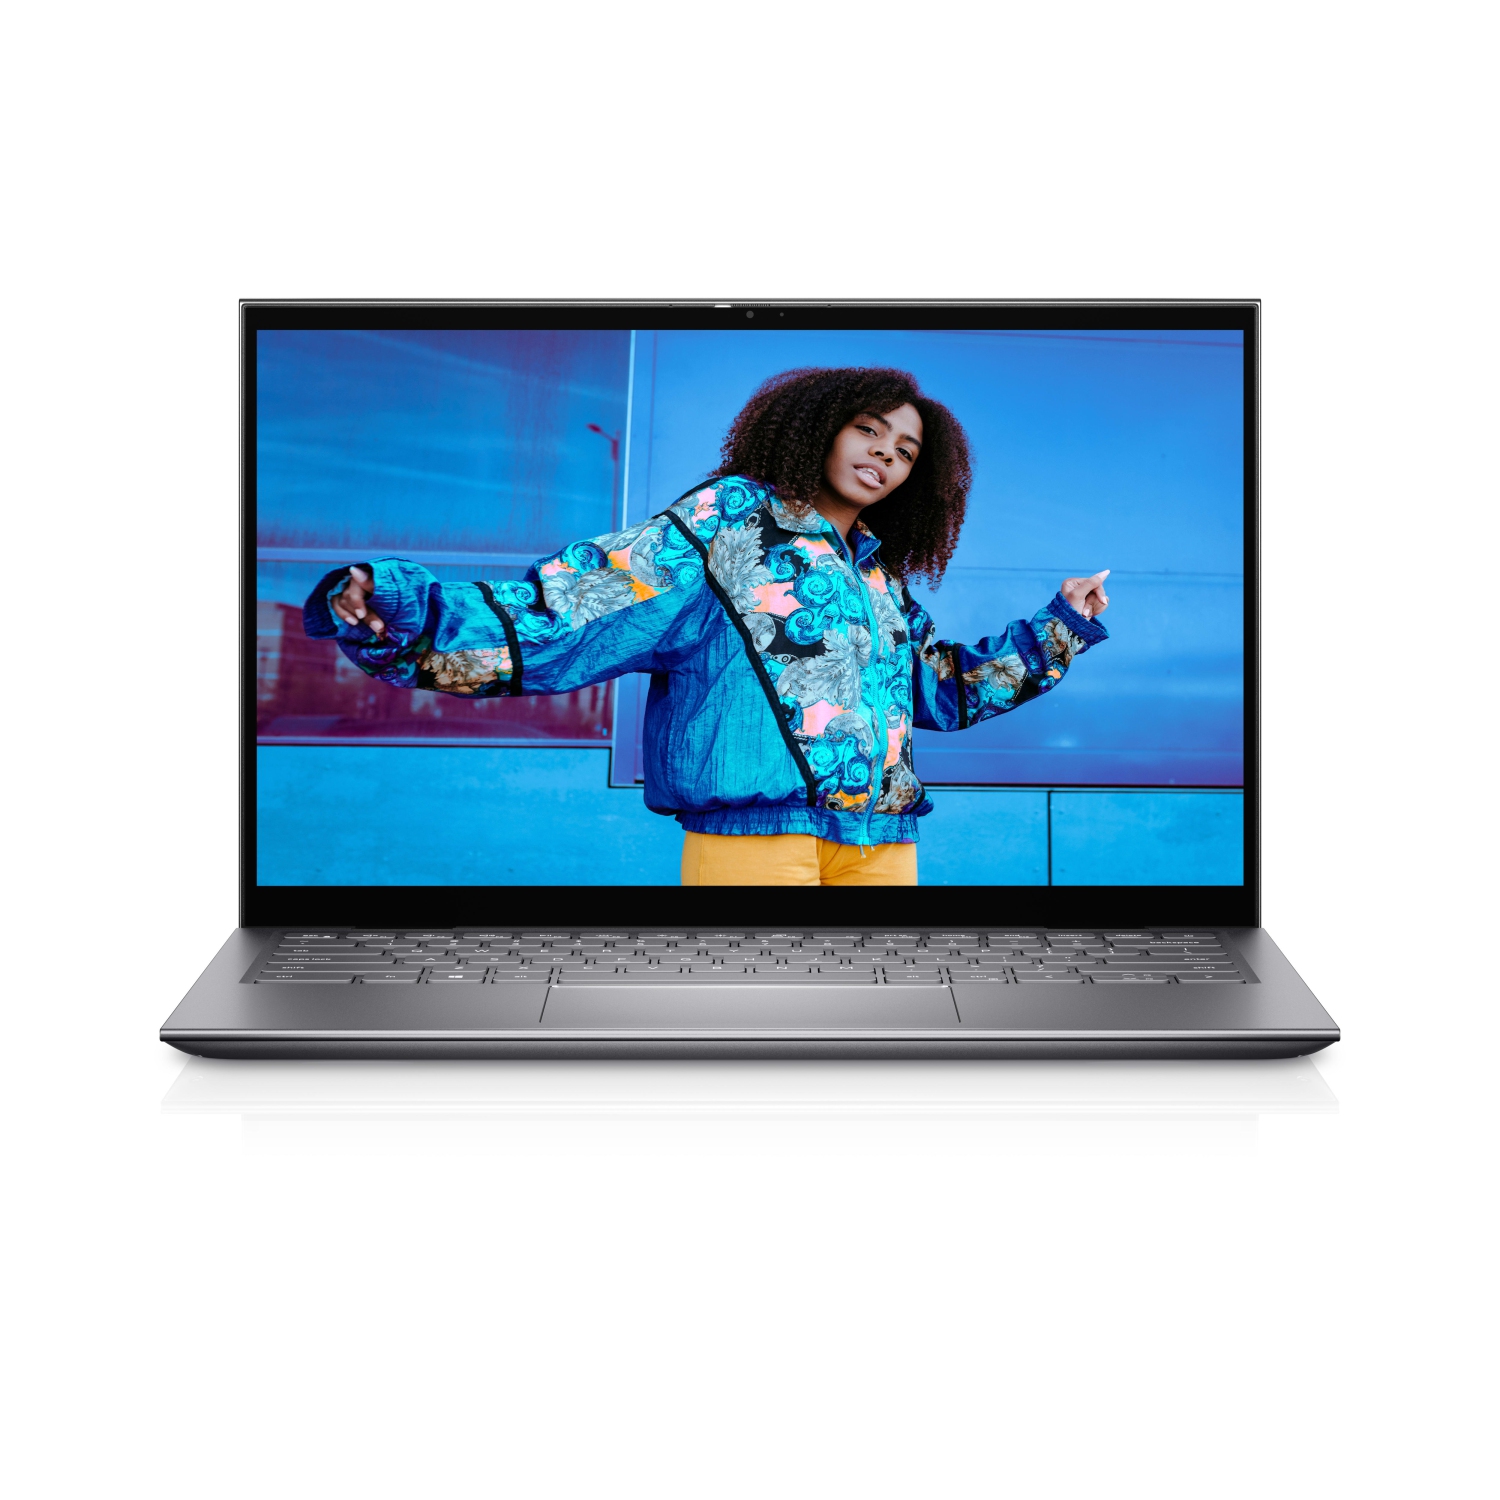 Refurbished (Excellent) – Dell Inspiron 5410 2-in-1 (2021) | 14" FHD Touch | Core i5 - 512GB SSD - 8GB RAM | 4 Cores @ 4.2 GHz - 11th Gen CPU